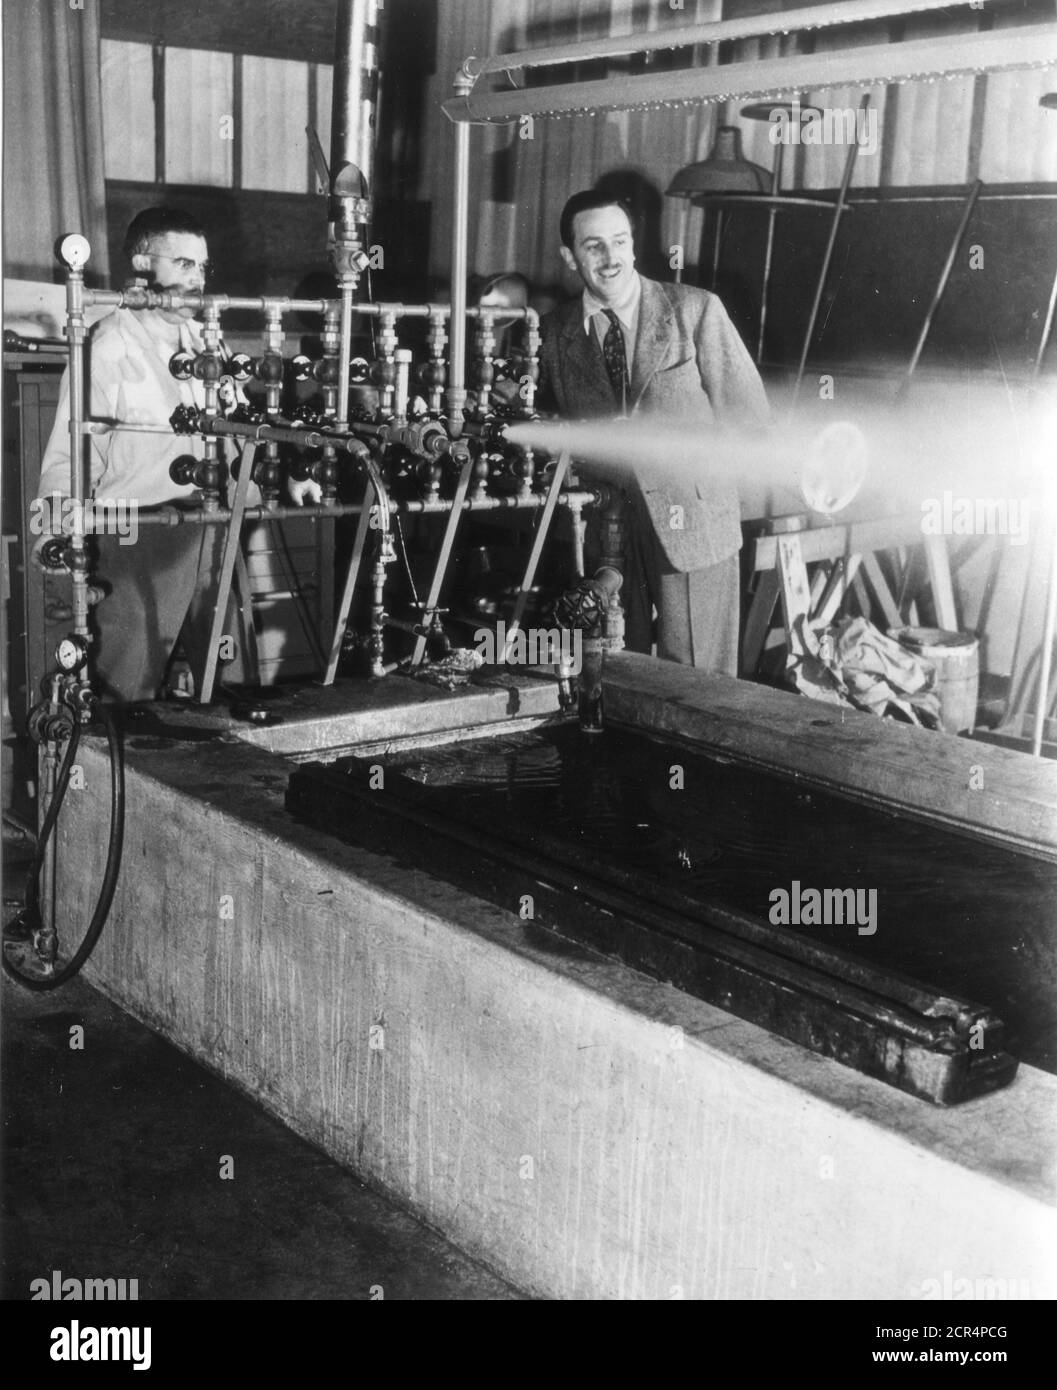 In the sound effects studio, Walt Disney examines an intricate steam-producing machine which, when properly recorded, becomes a whistle blast, Burbank, CA, 1943. (Photo by Office of War Information/RBM Vintage Images) Stock Photo